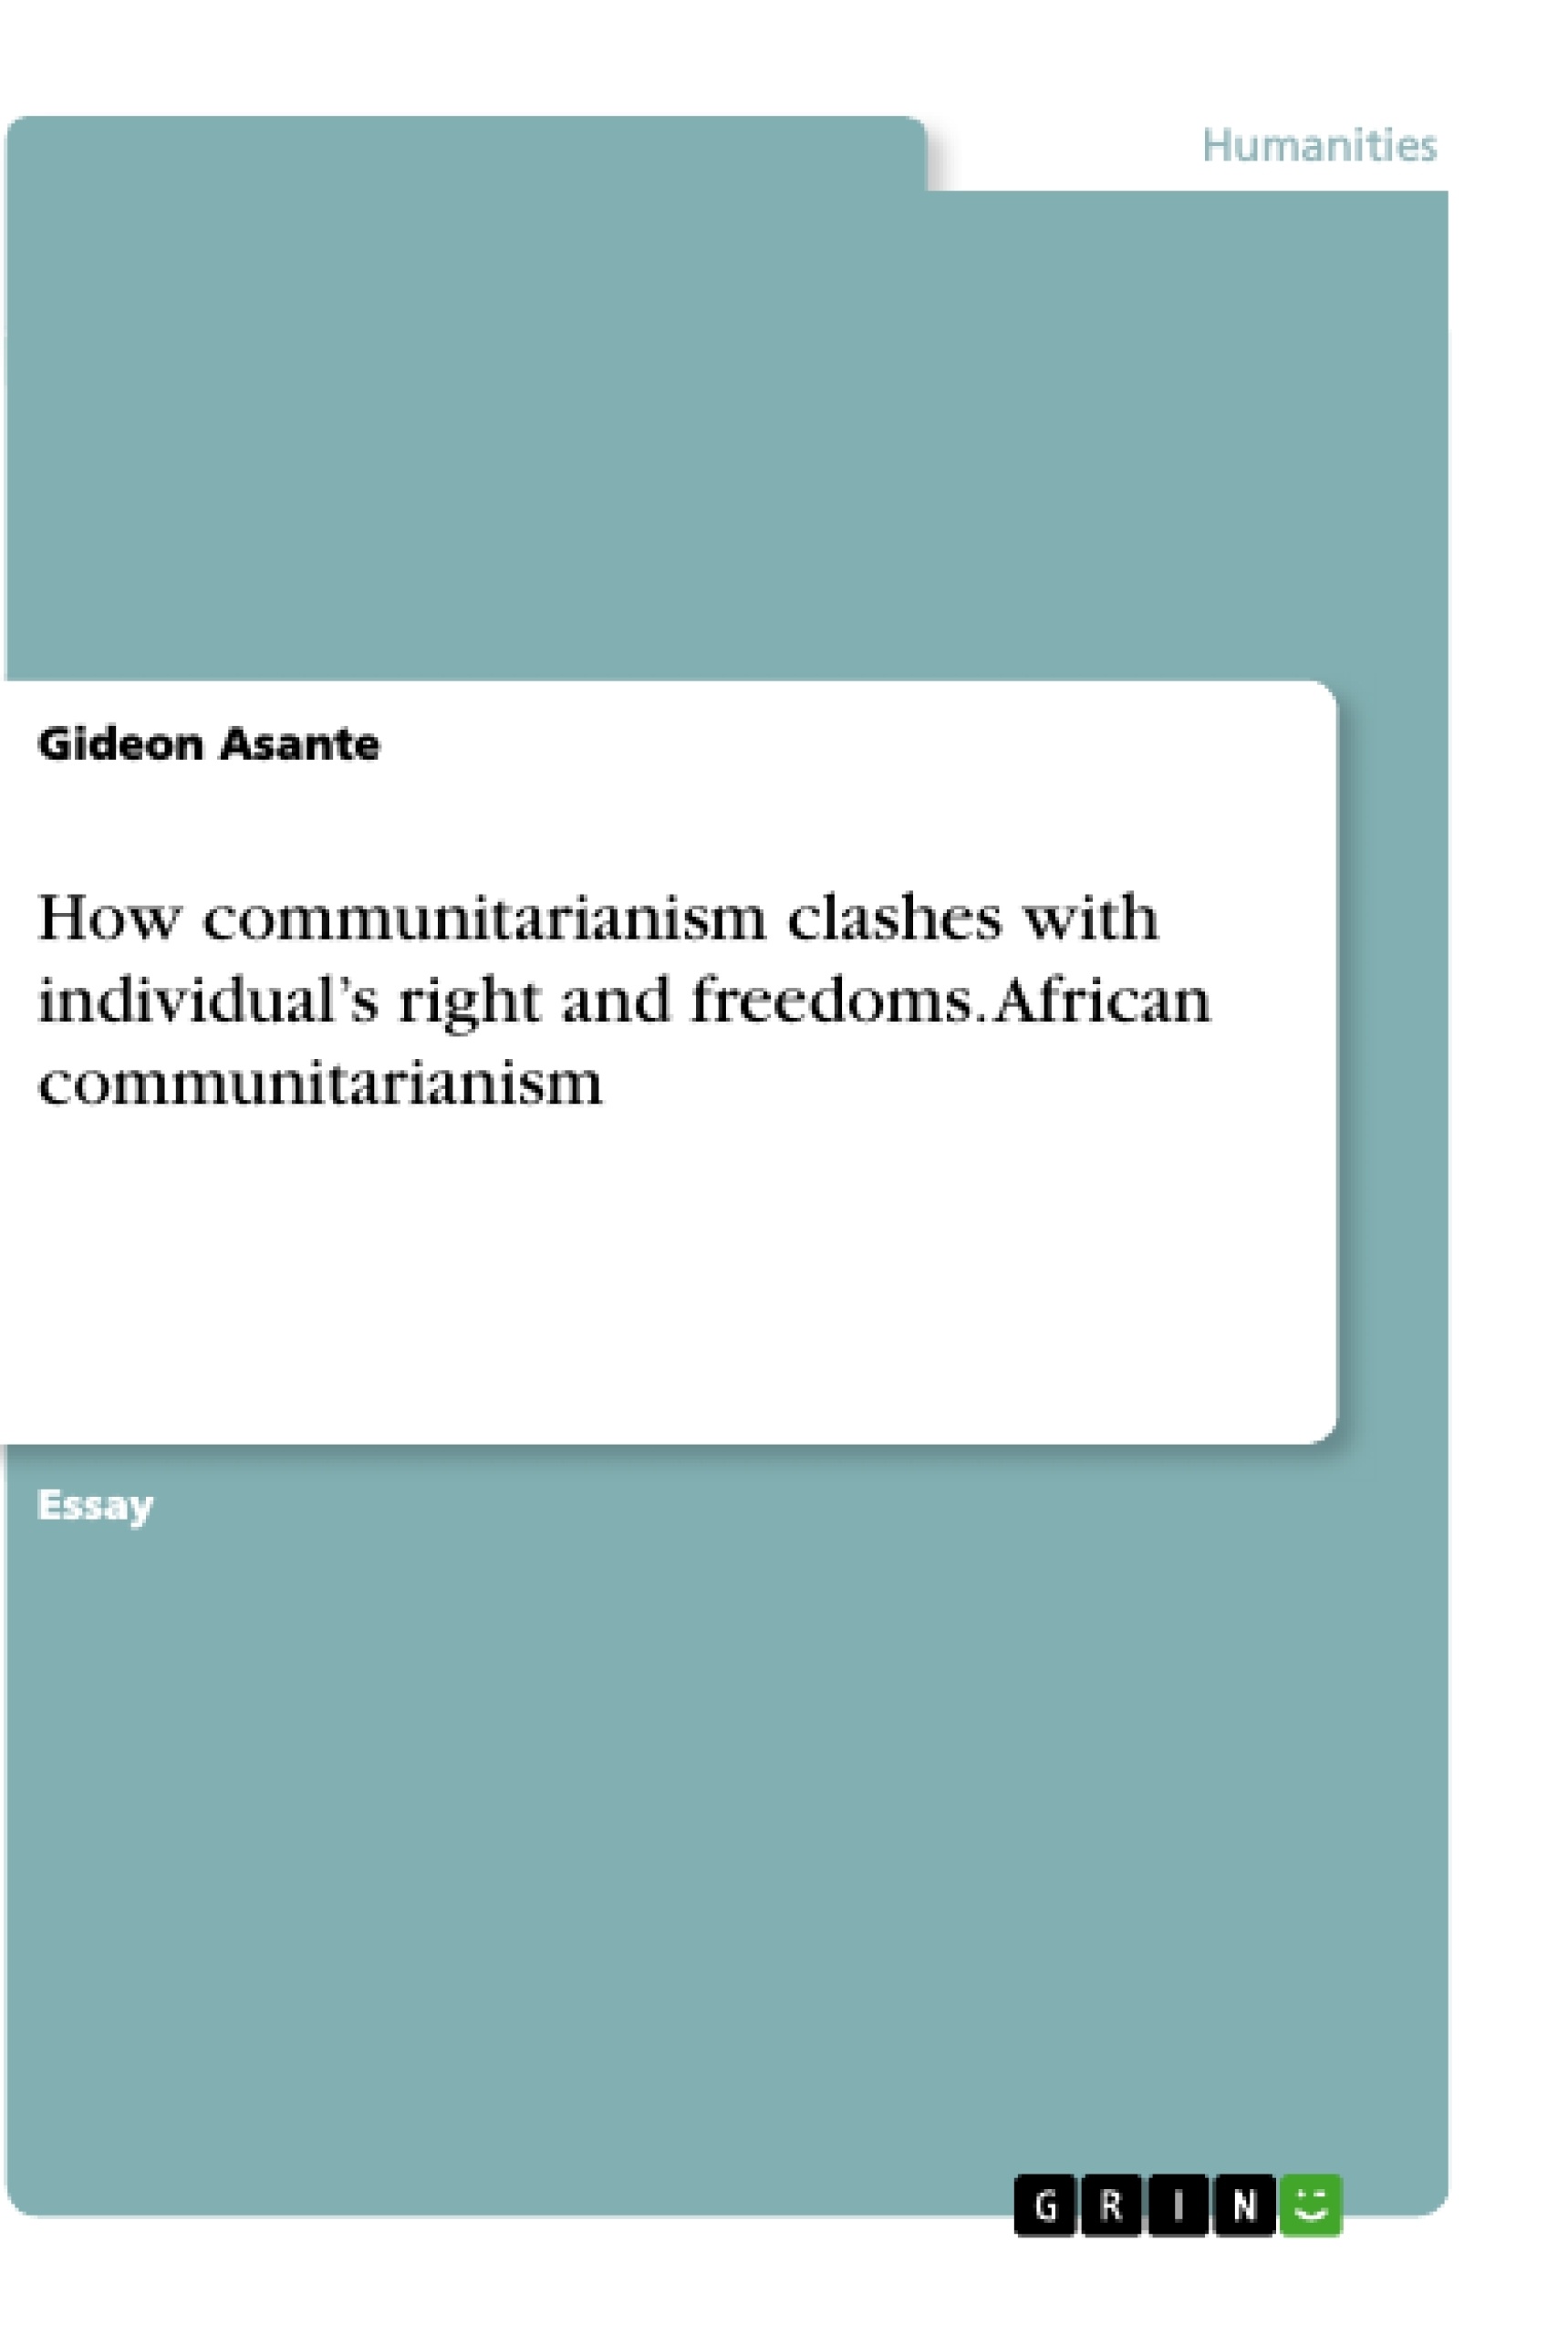 Título: How communitarianism clashes with individual’s right and freedoms. African communitarianism